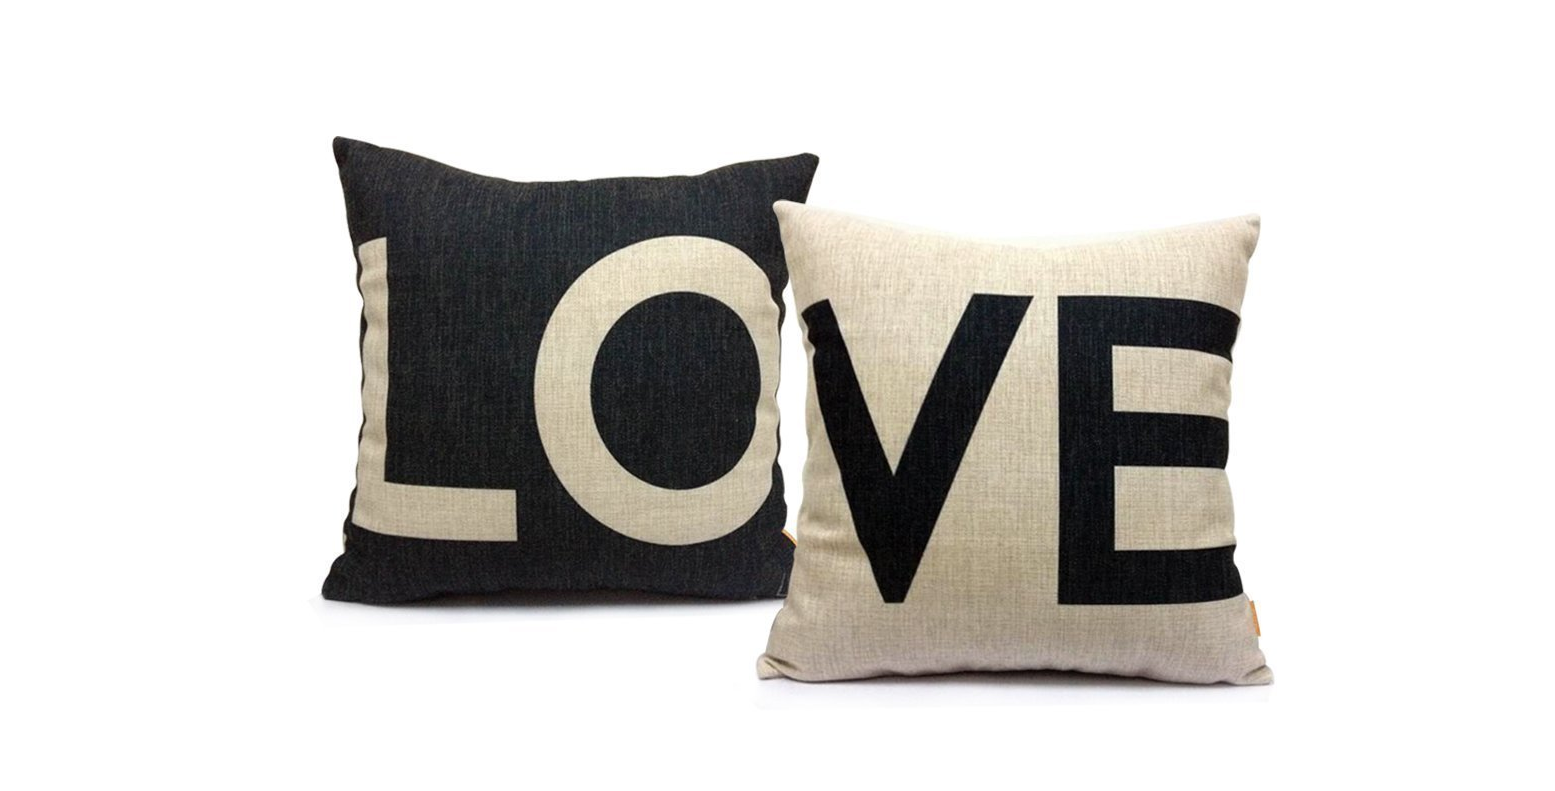 18 X 18″ Decorative LOVE Throw Pillow Case Set Just $4.99 Shipped!!